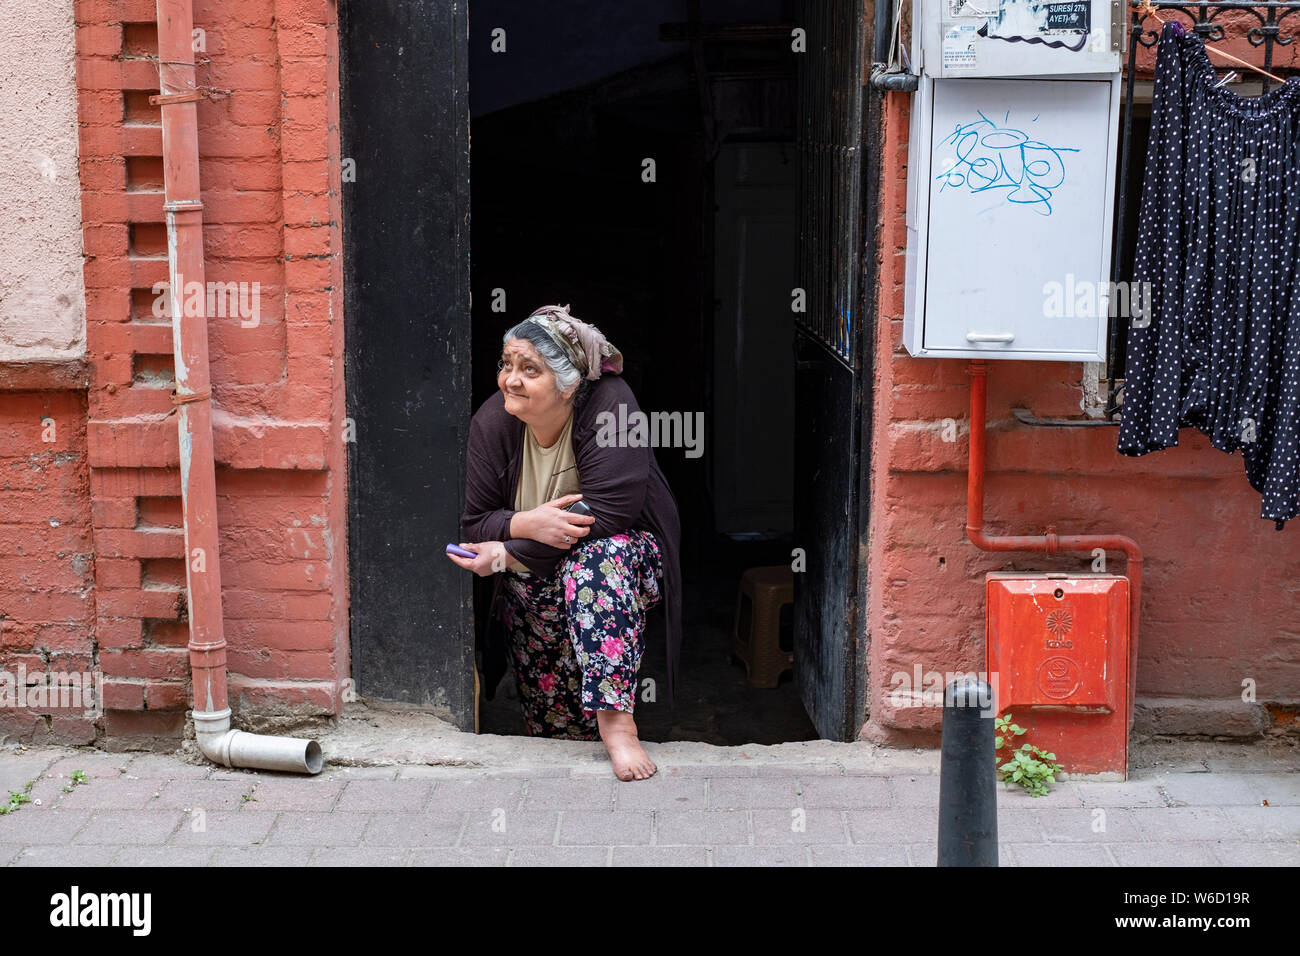 An elderly Turkish woman in a headscarf surveys the activity on the street in front of her house in central Istanbul, Turkey Stock Photo